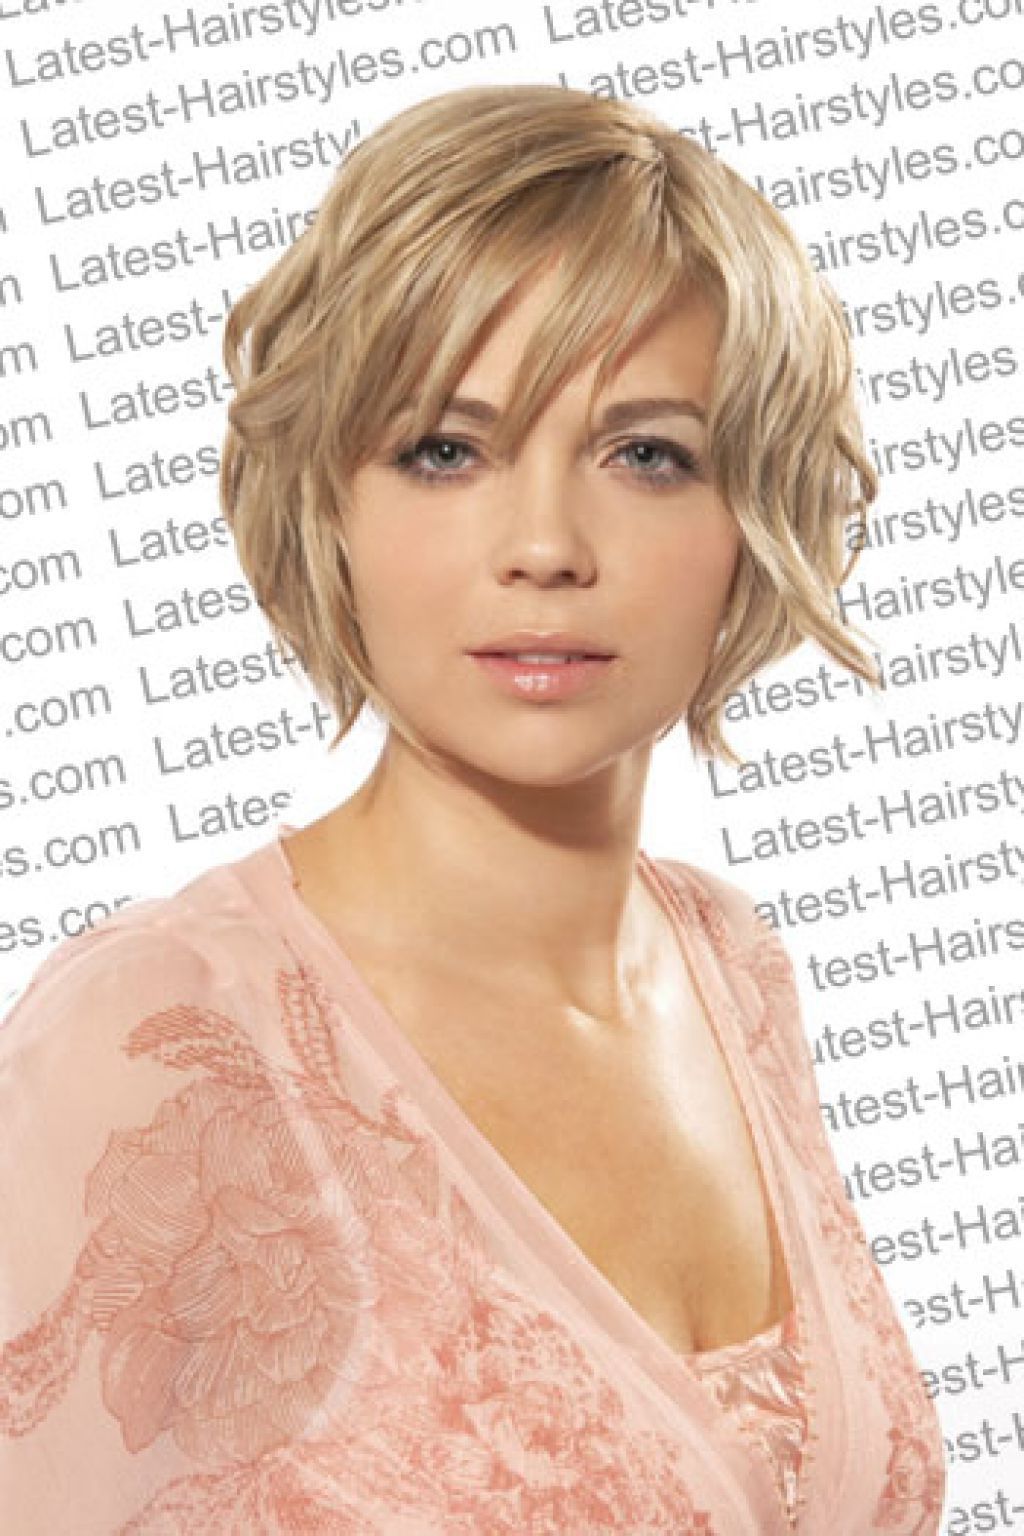 Pinterest Pertaining To Most Recent Medium Hairstyles For Small Faces (View 19 of 20)